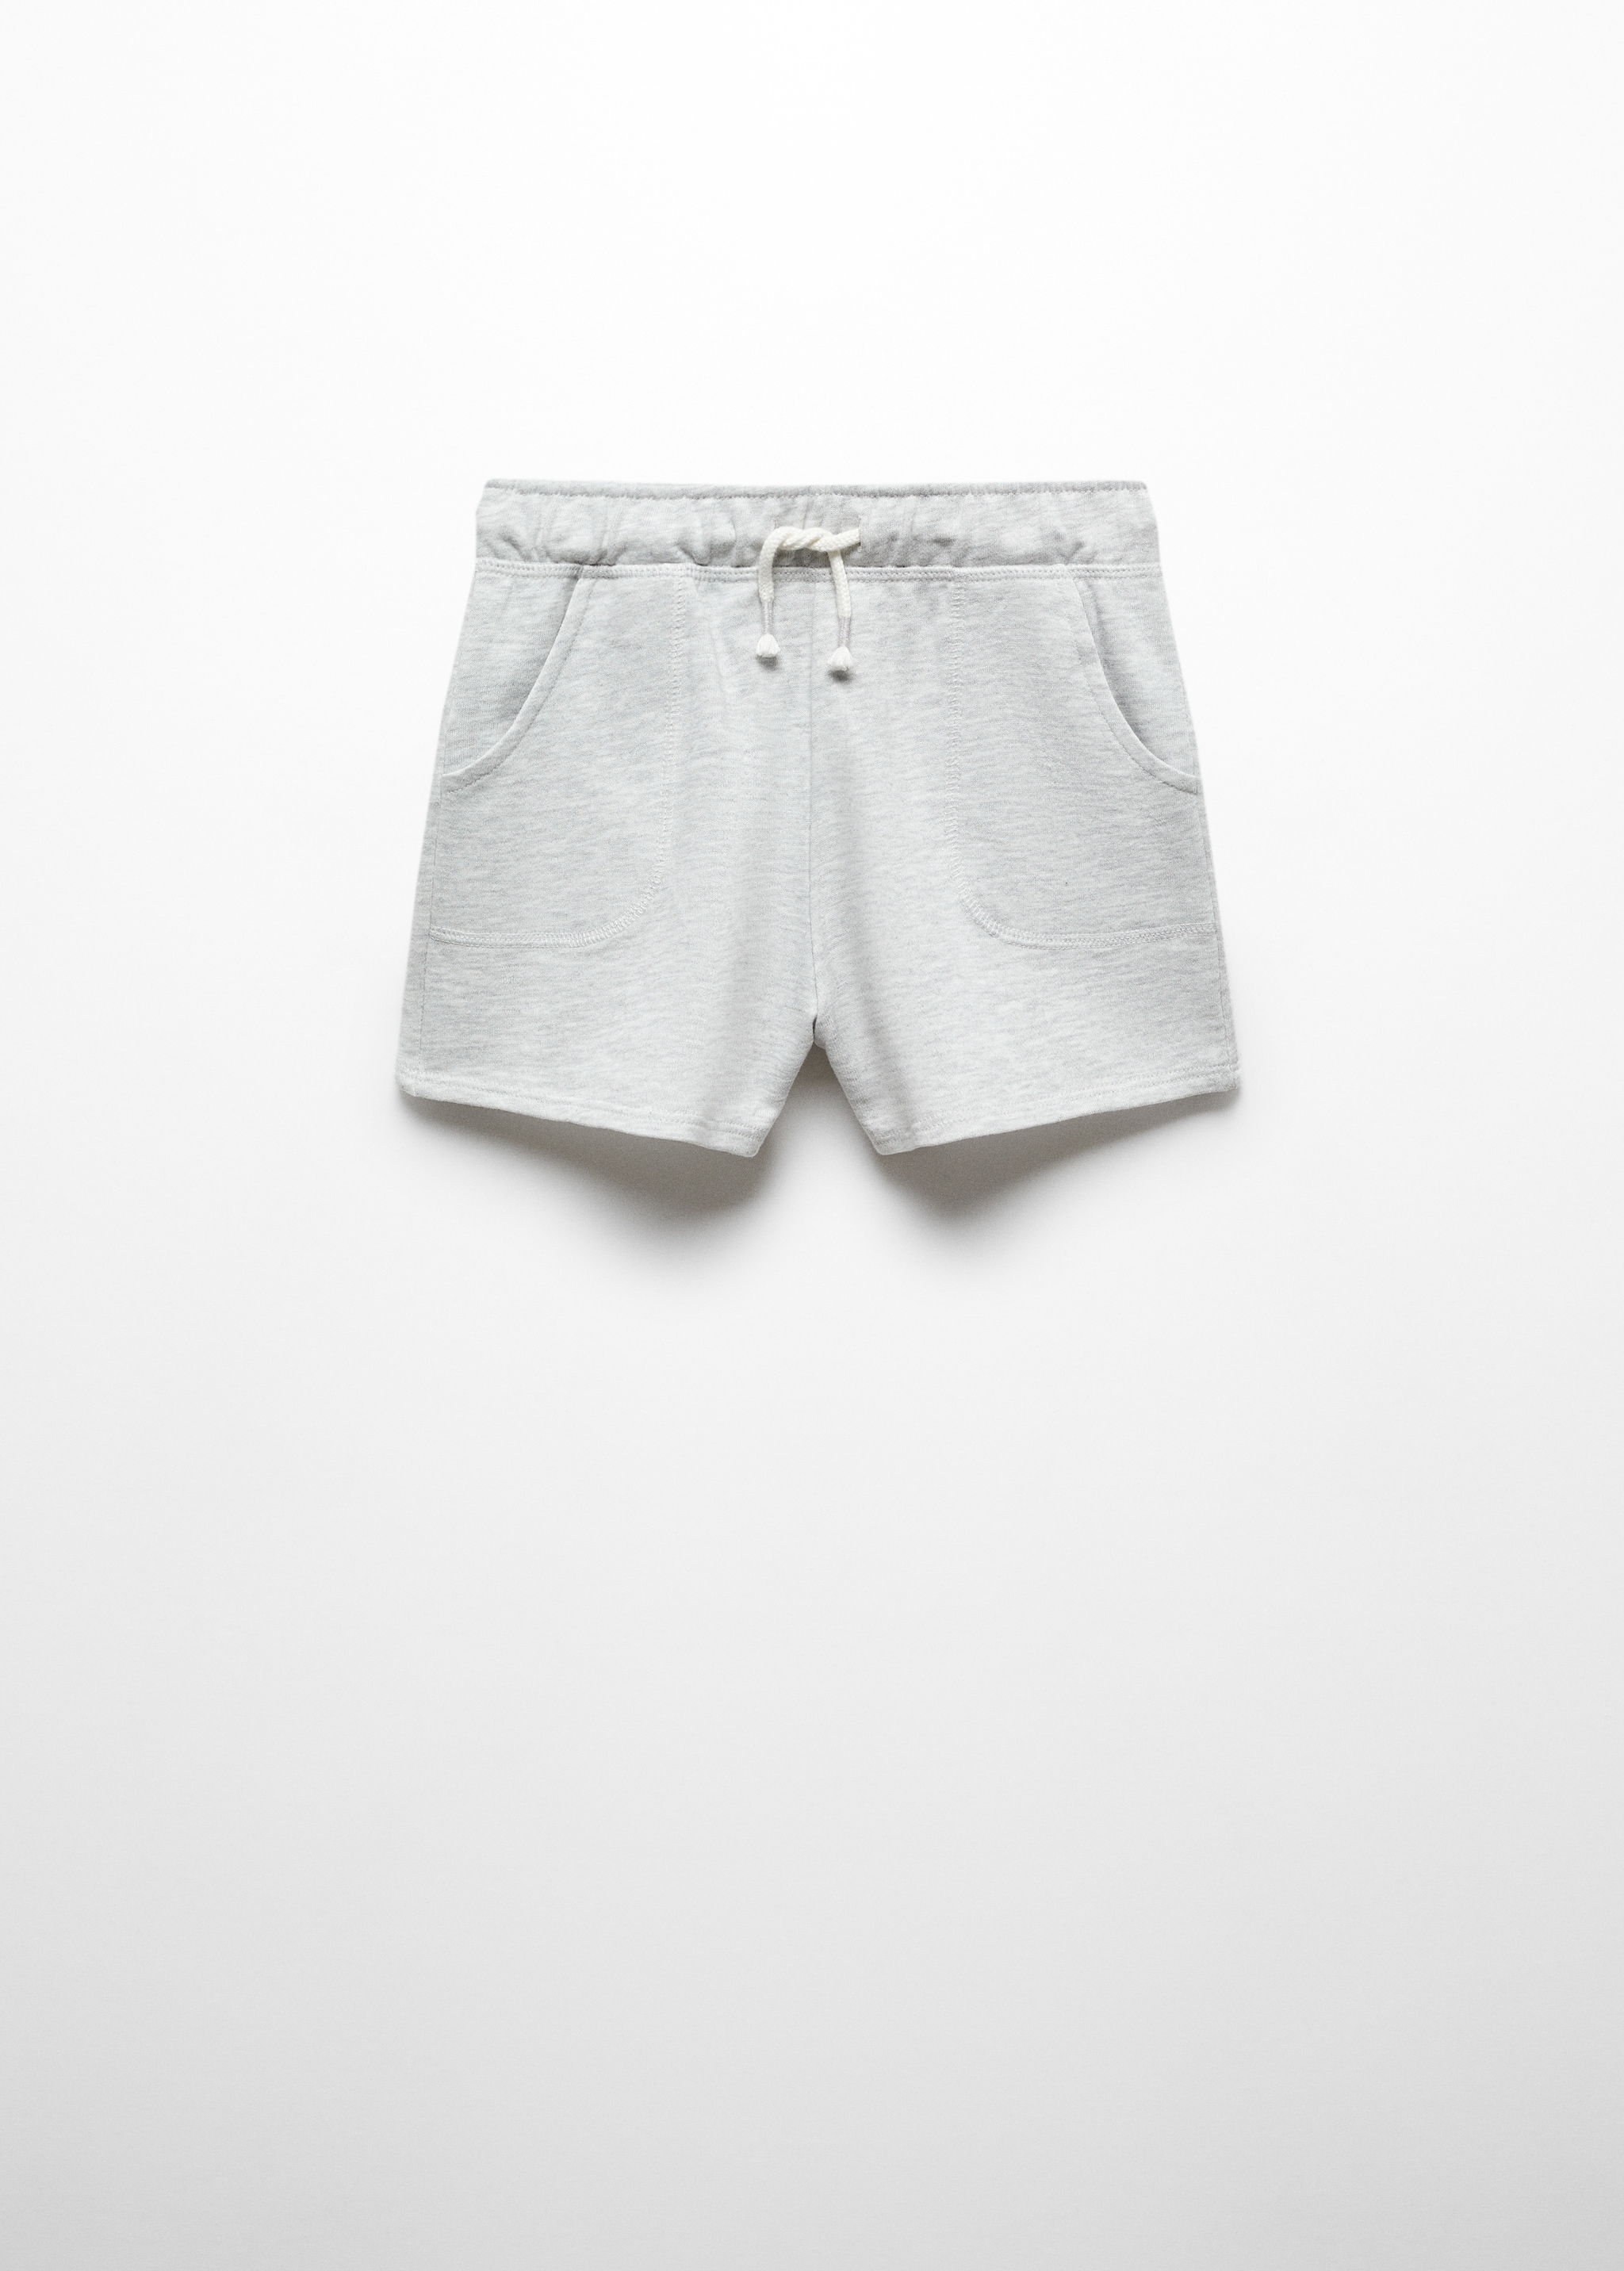 Cotton drawstring waist shorts - Article without model